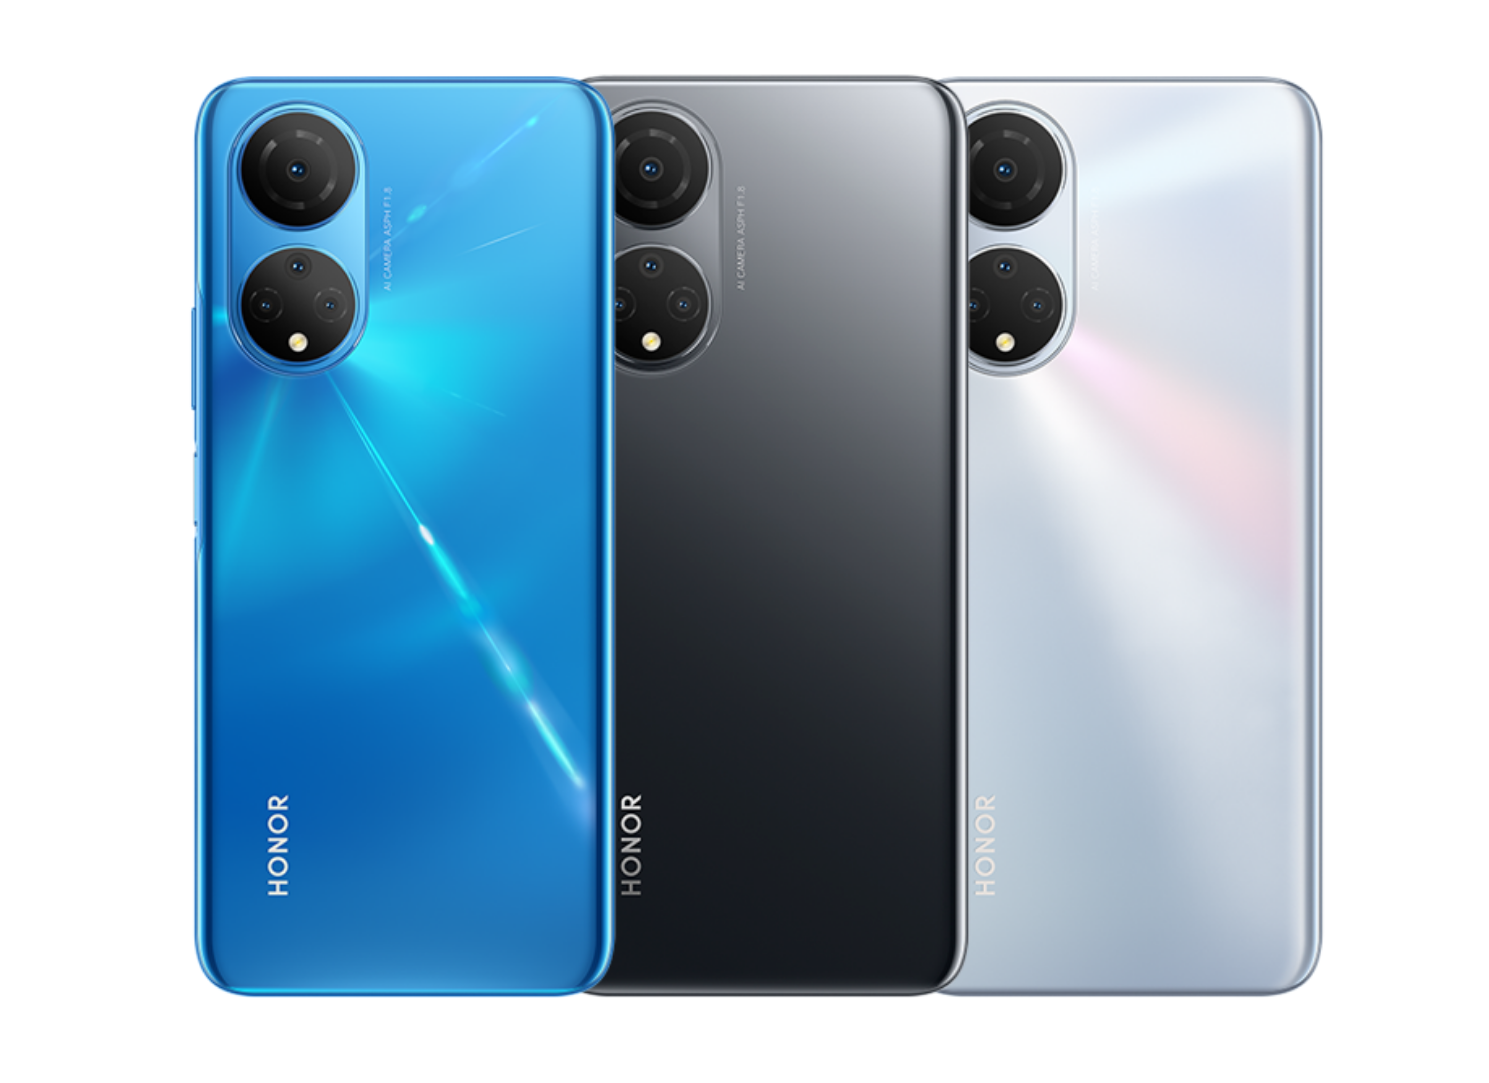 Honor X7 arrives in Europe for €199 with a 90 Hz display and a Qualcomm Snapdragon 680 chipset - NotebookCheck.net News